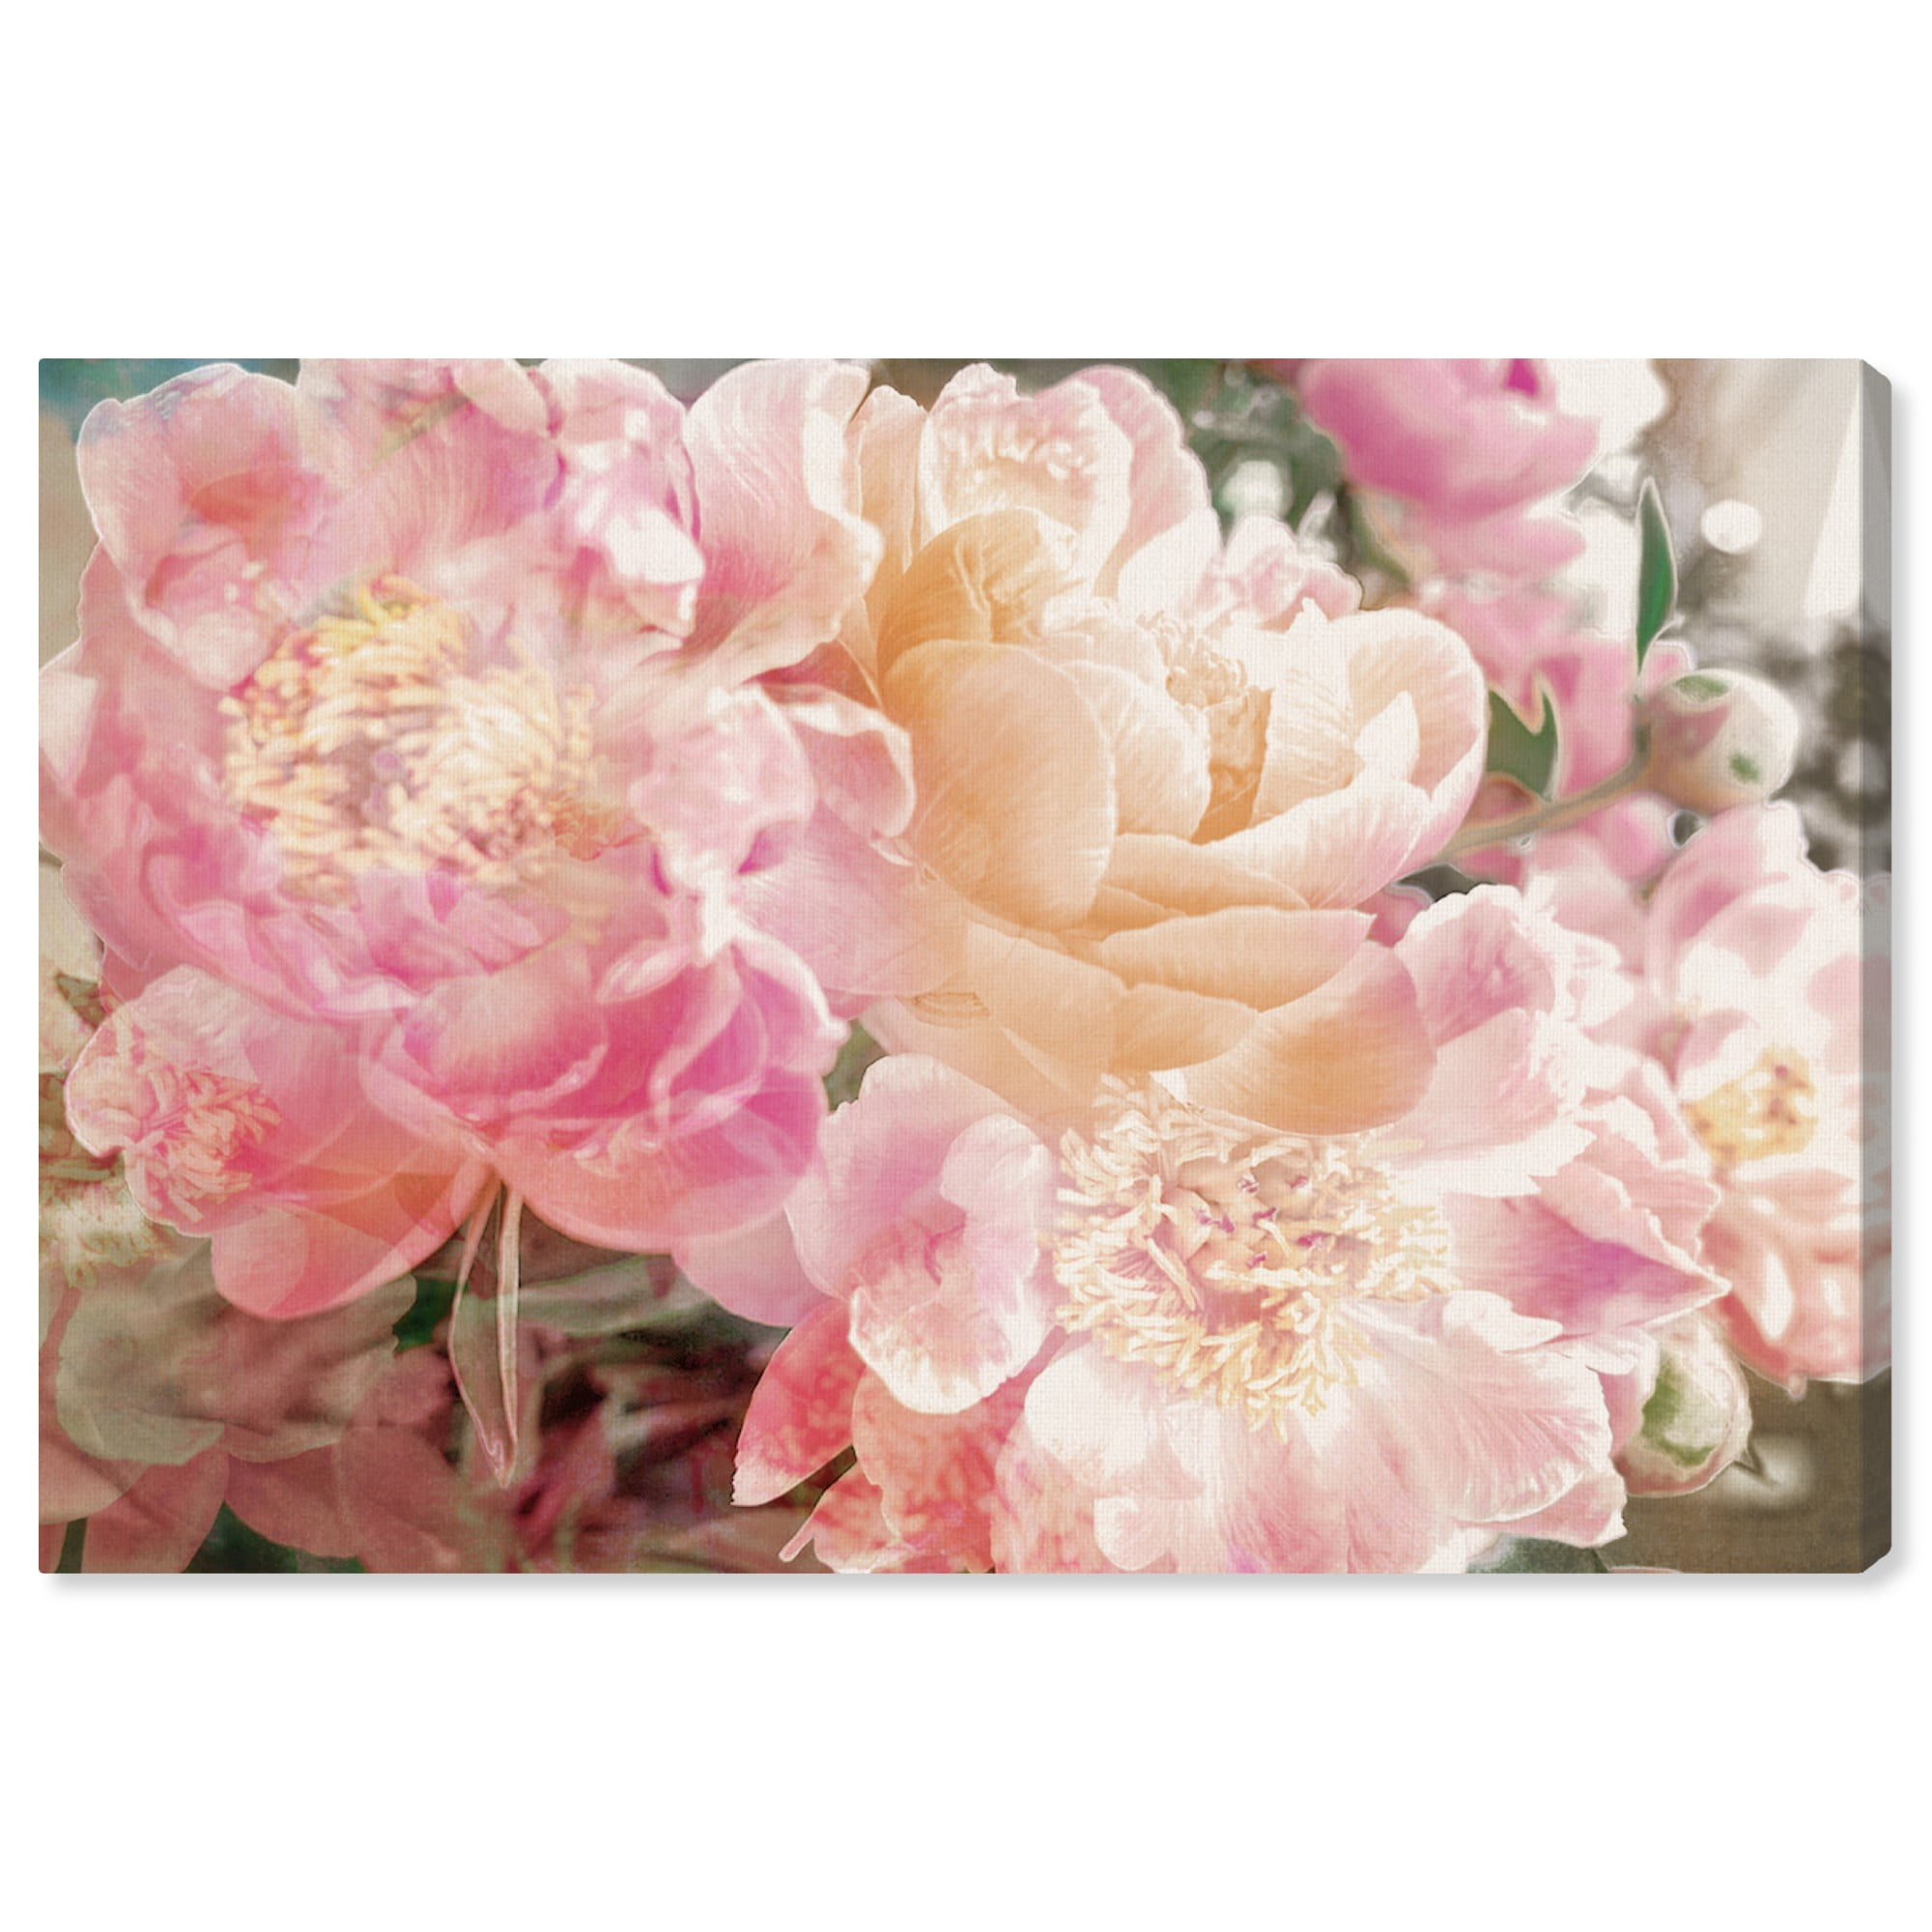 PINK PEONY FLOWERS PAINTING STYLE FLORAL MODERN 3 PANELS CANVAS PRINT WALL ART 